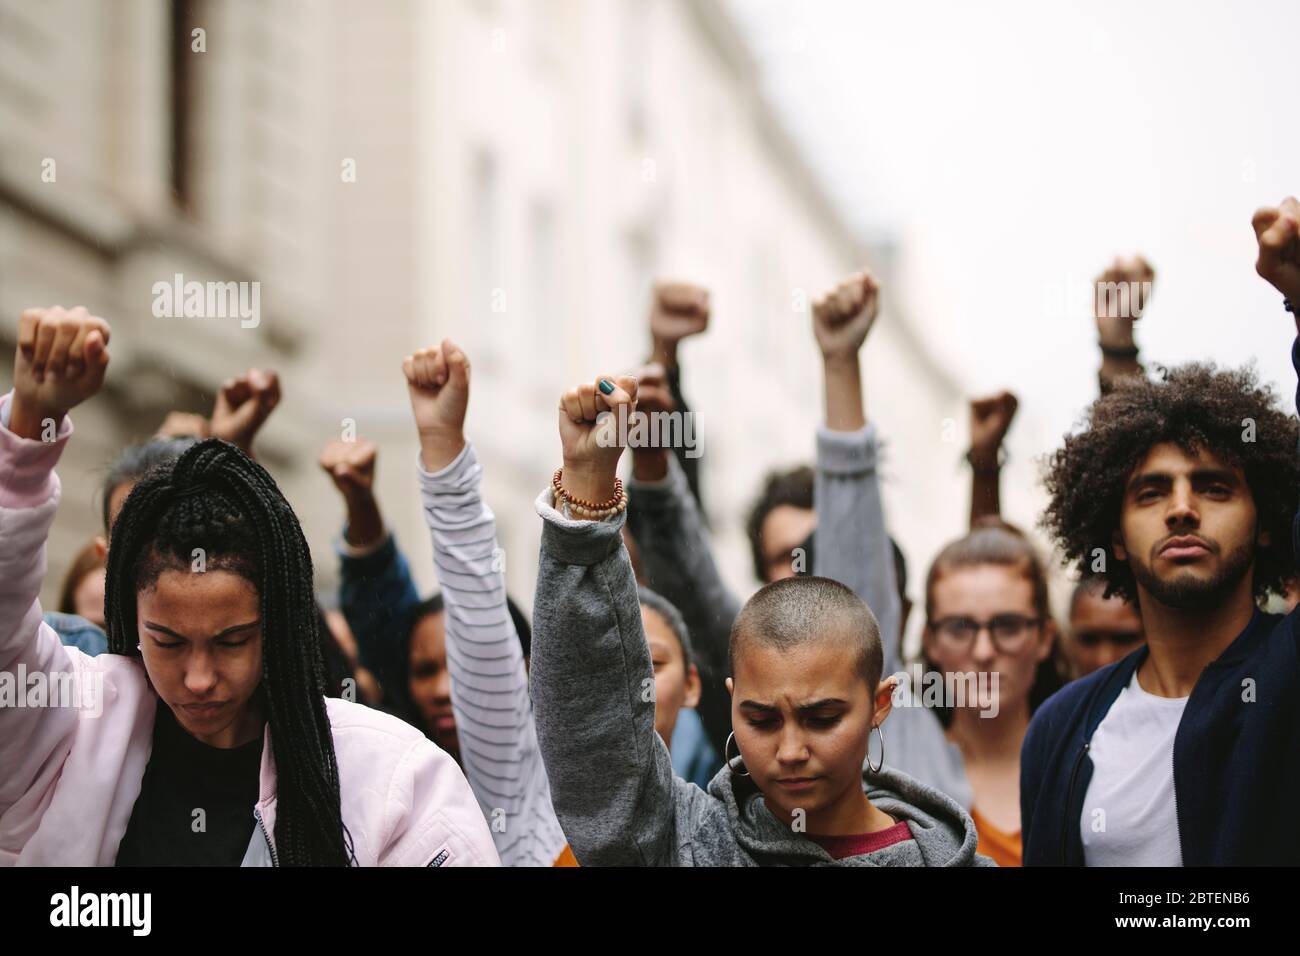 Group of protesters on the road with their arms raised. Multi-ethnic people protesting on the street. Stock Photo